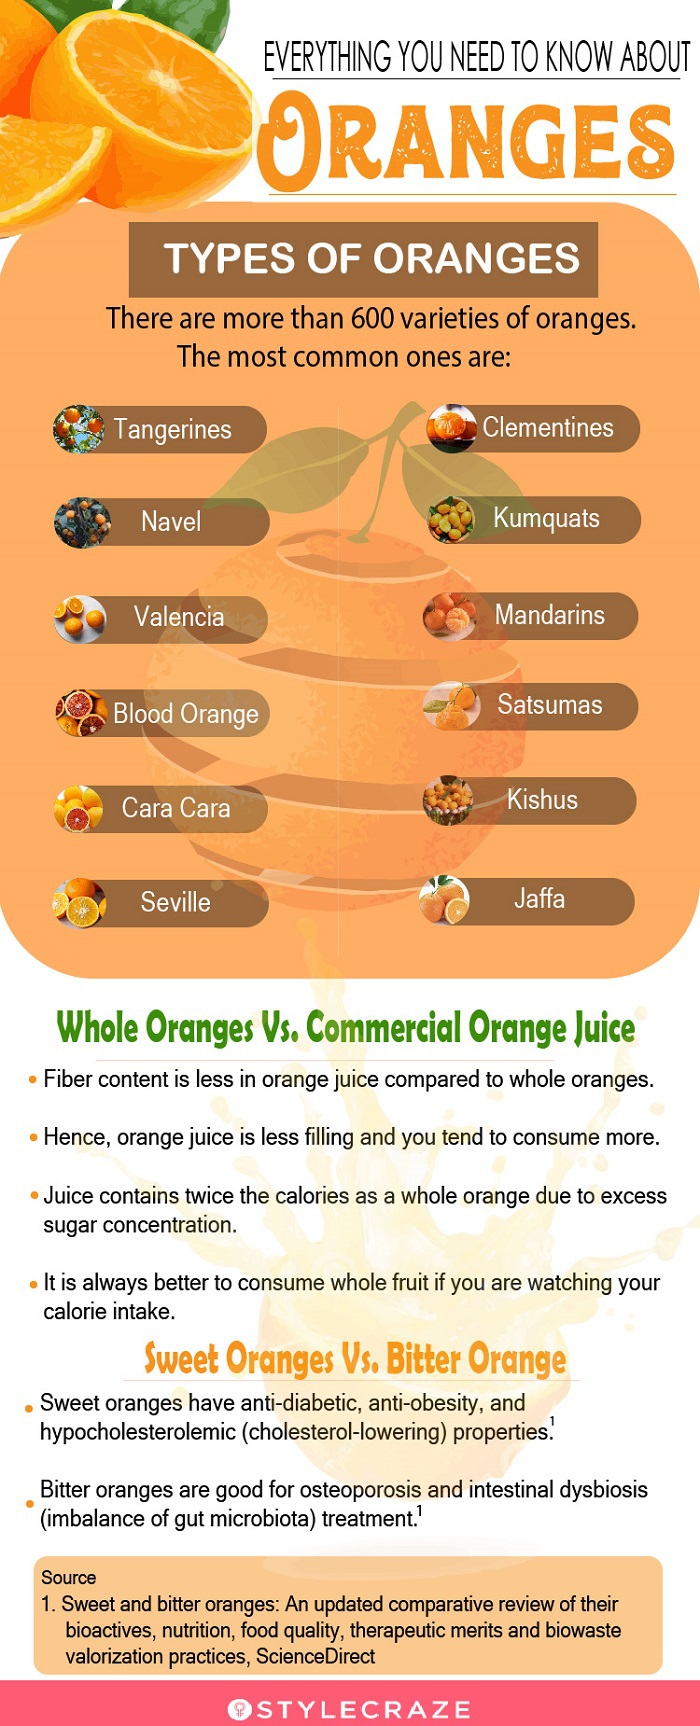 everything you need to know about oranges [infographic]